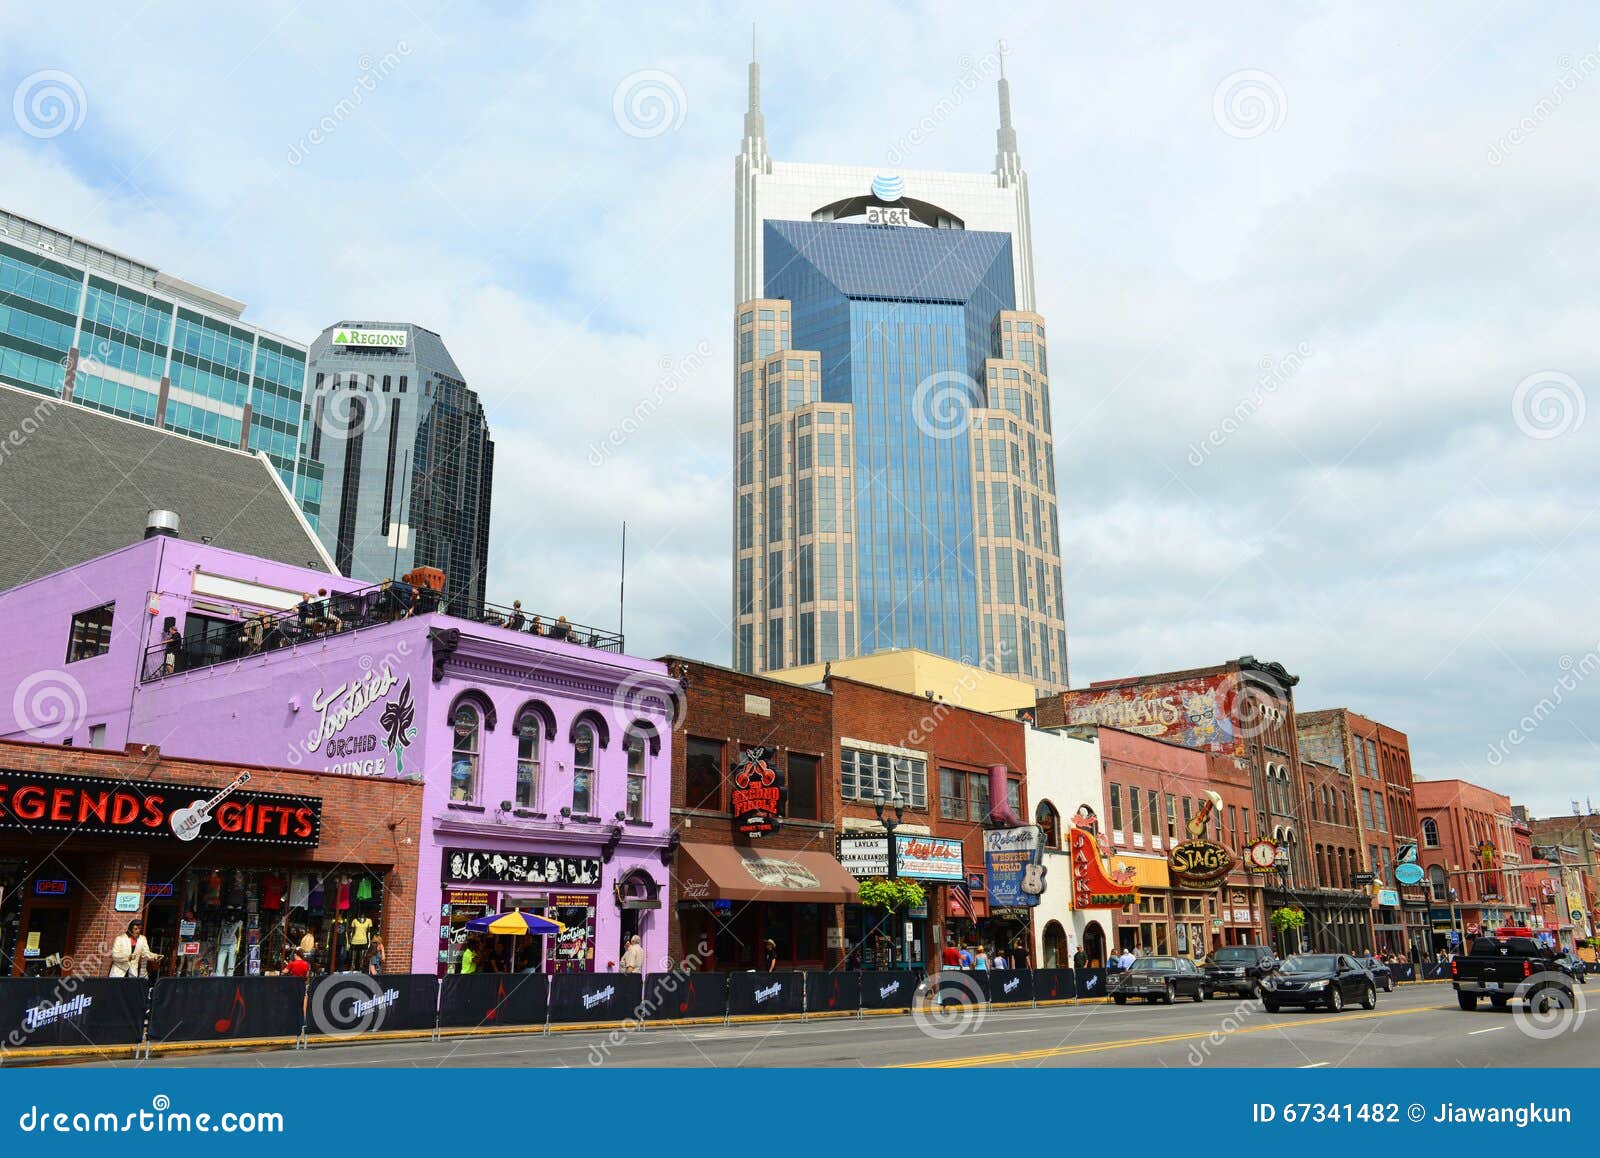 AT&T Building And Broadway, Nashville, Tennessee Editorial Image ...